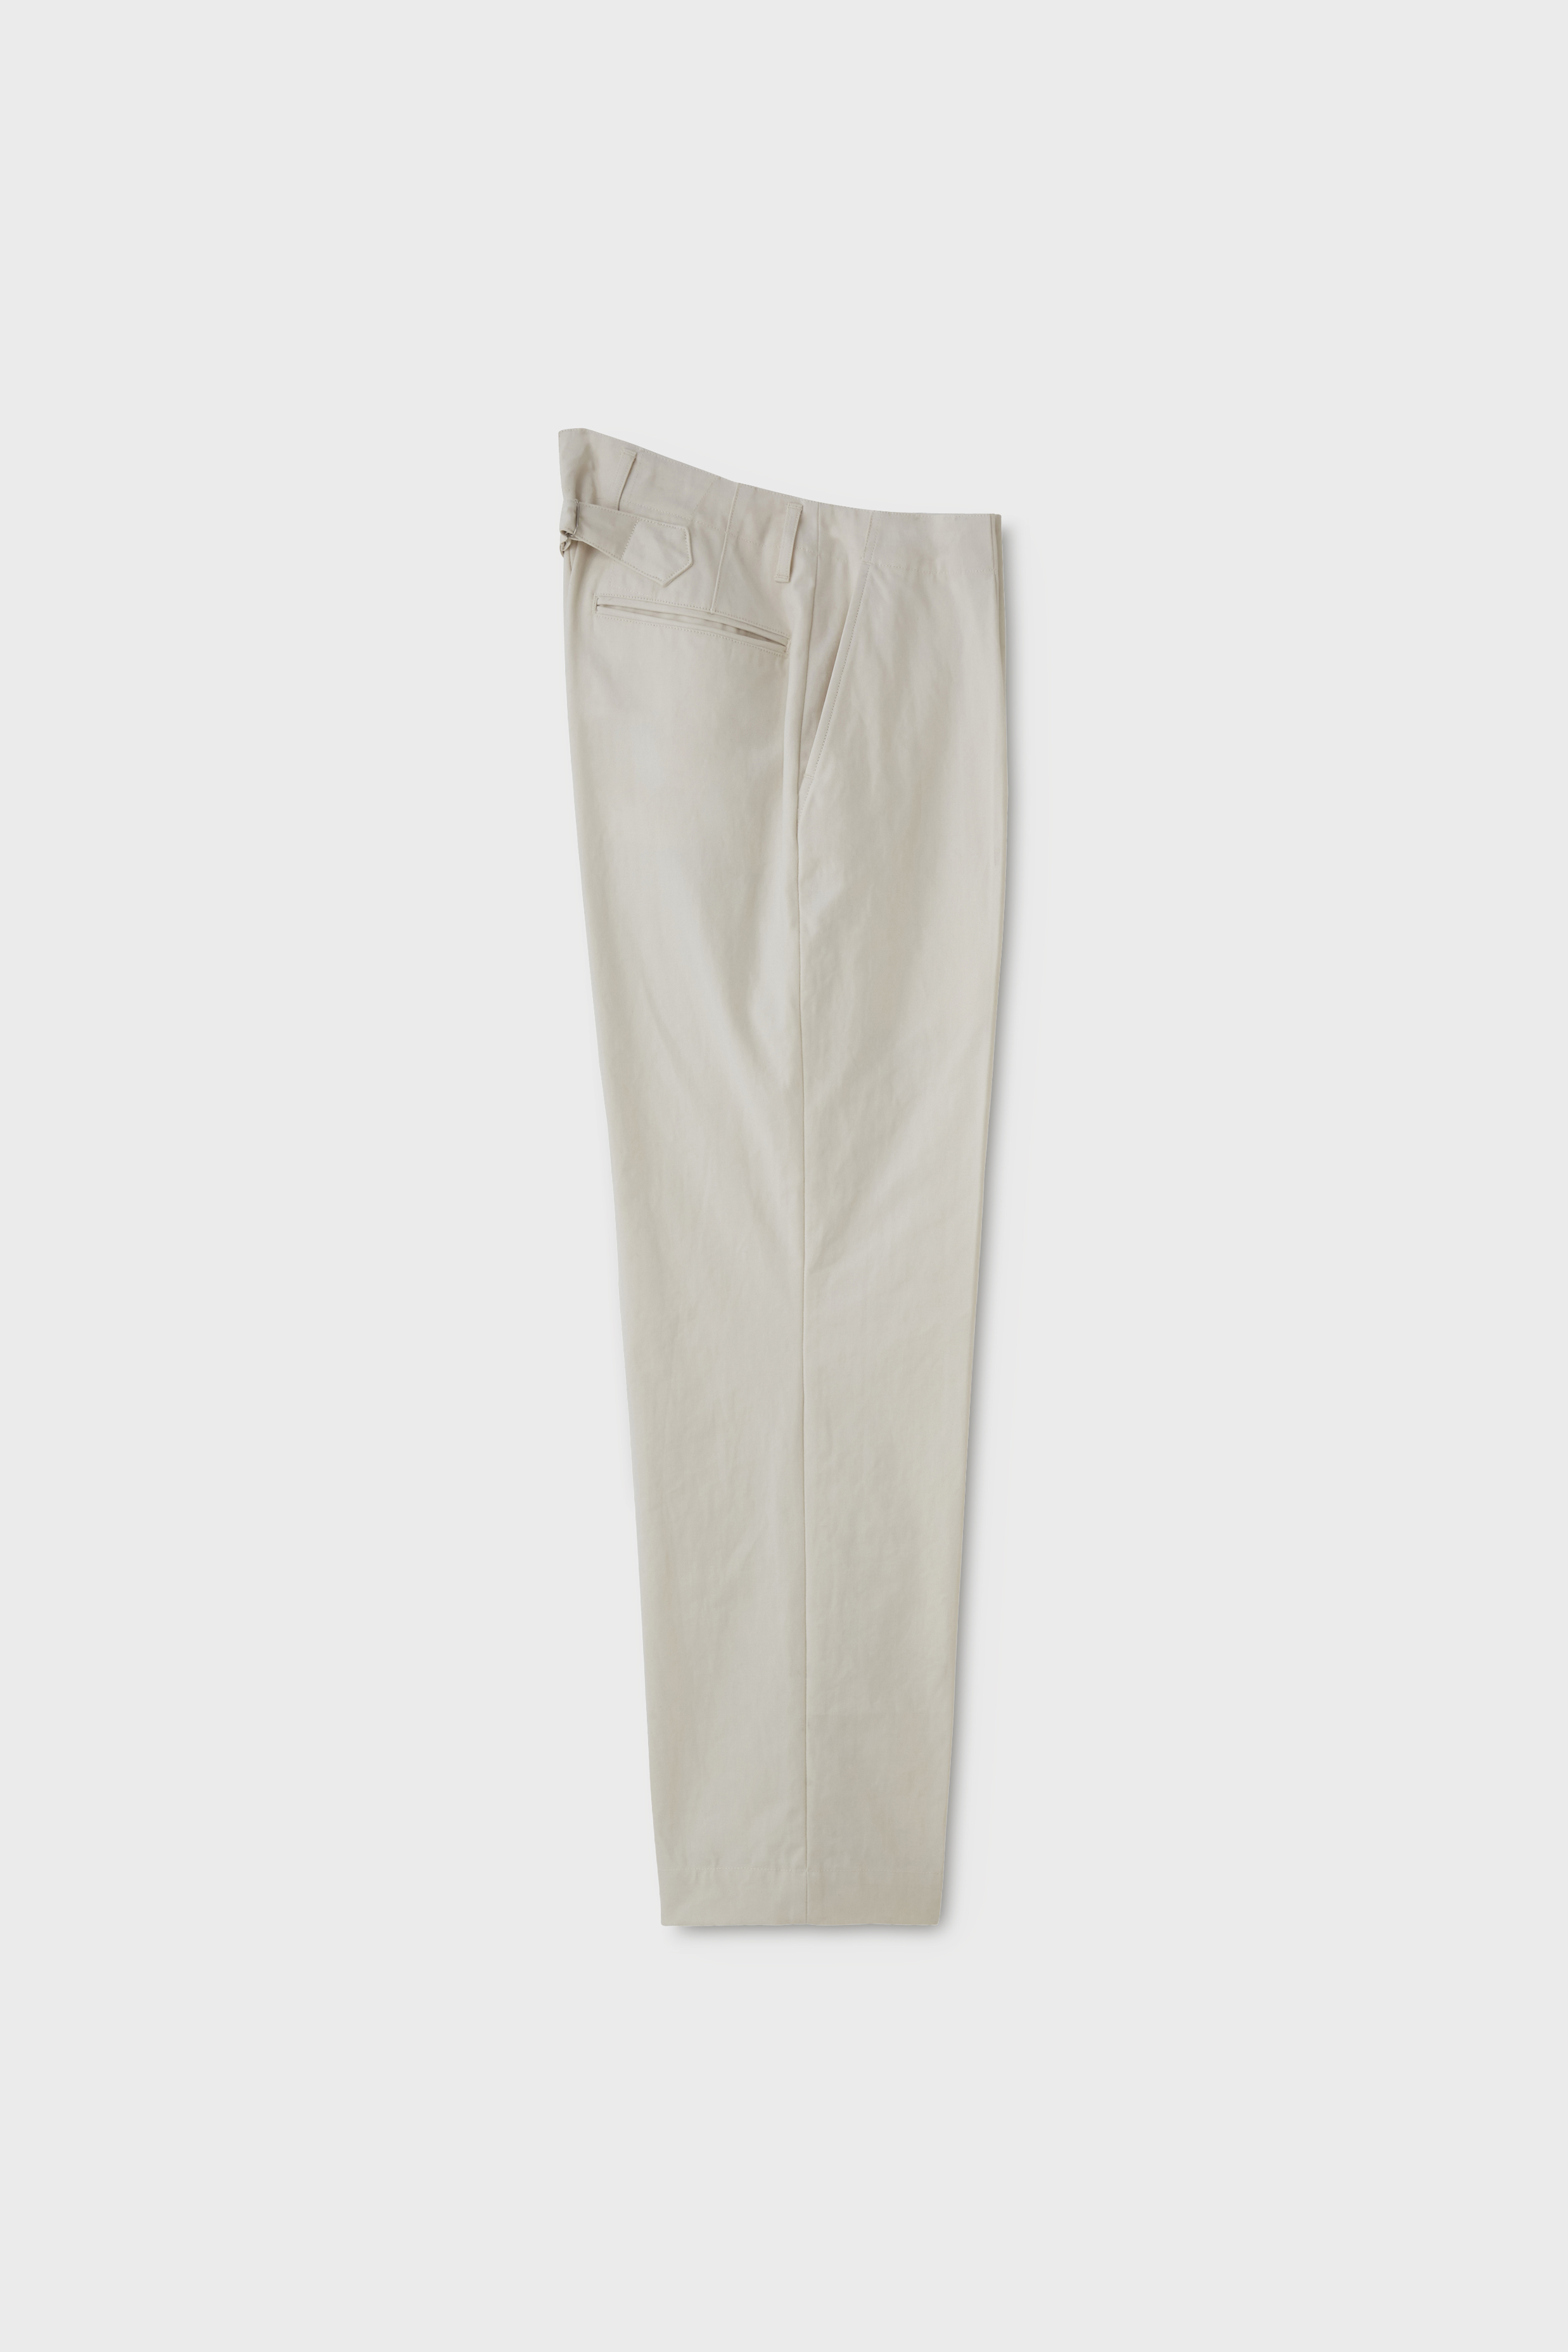 PHIGVEL CANVAS CLOTH GENT'S TROUSERS (2COL)